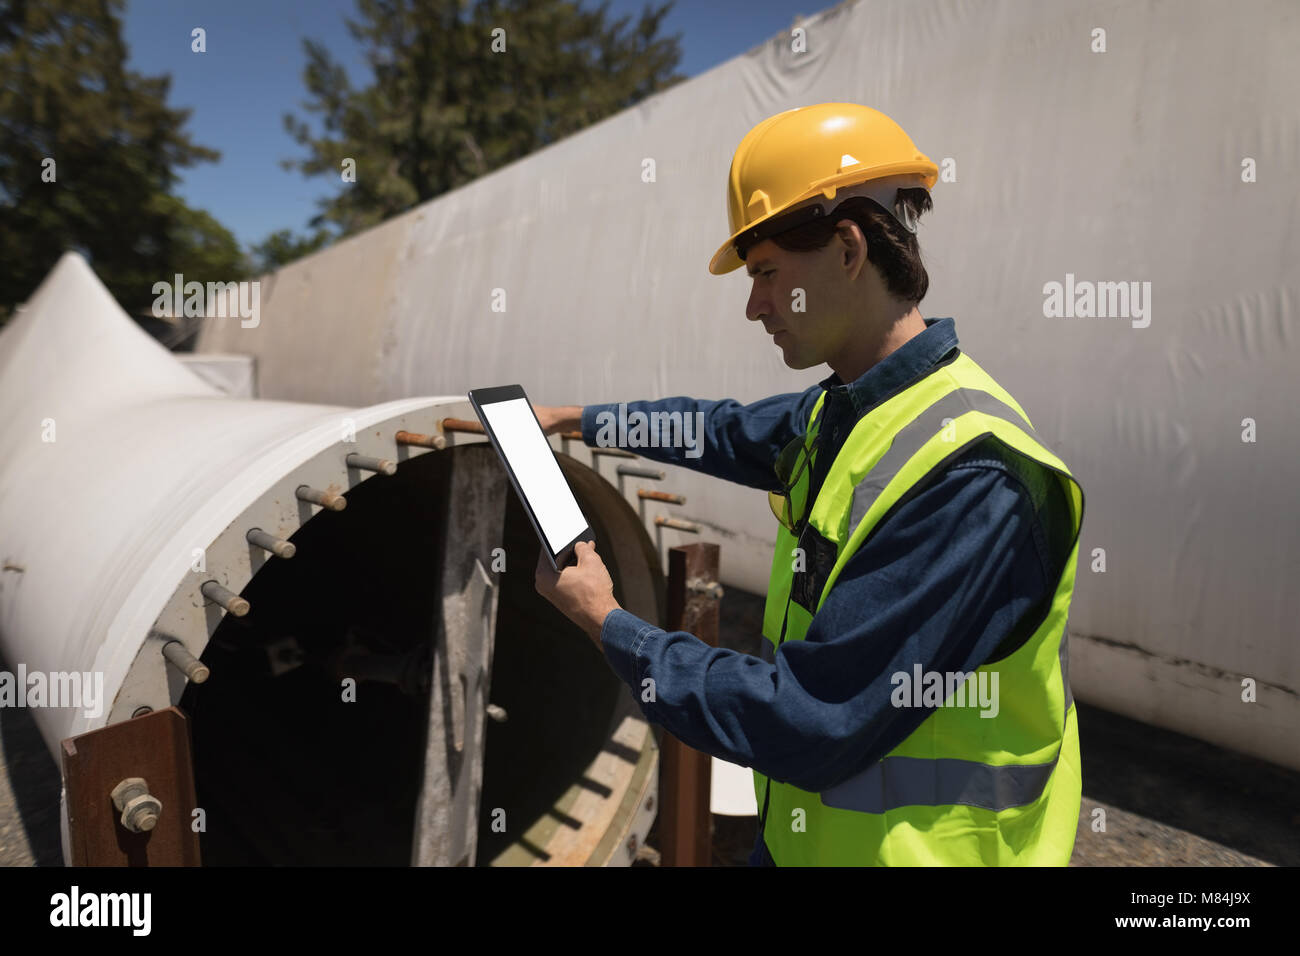 Male worker using digital tablet while examining concrete tunnel Stock Photo